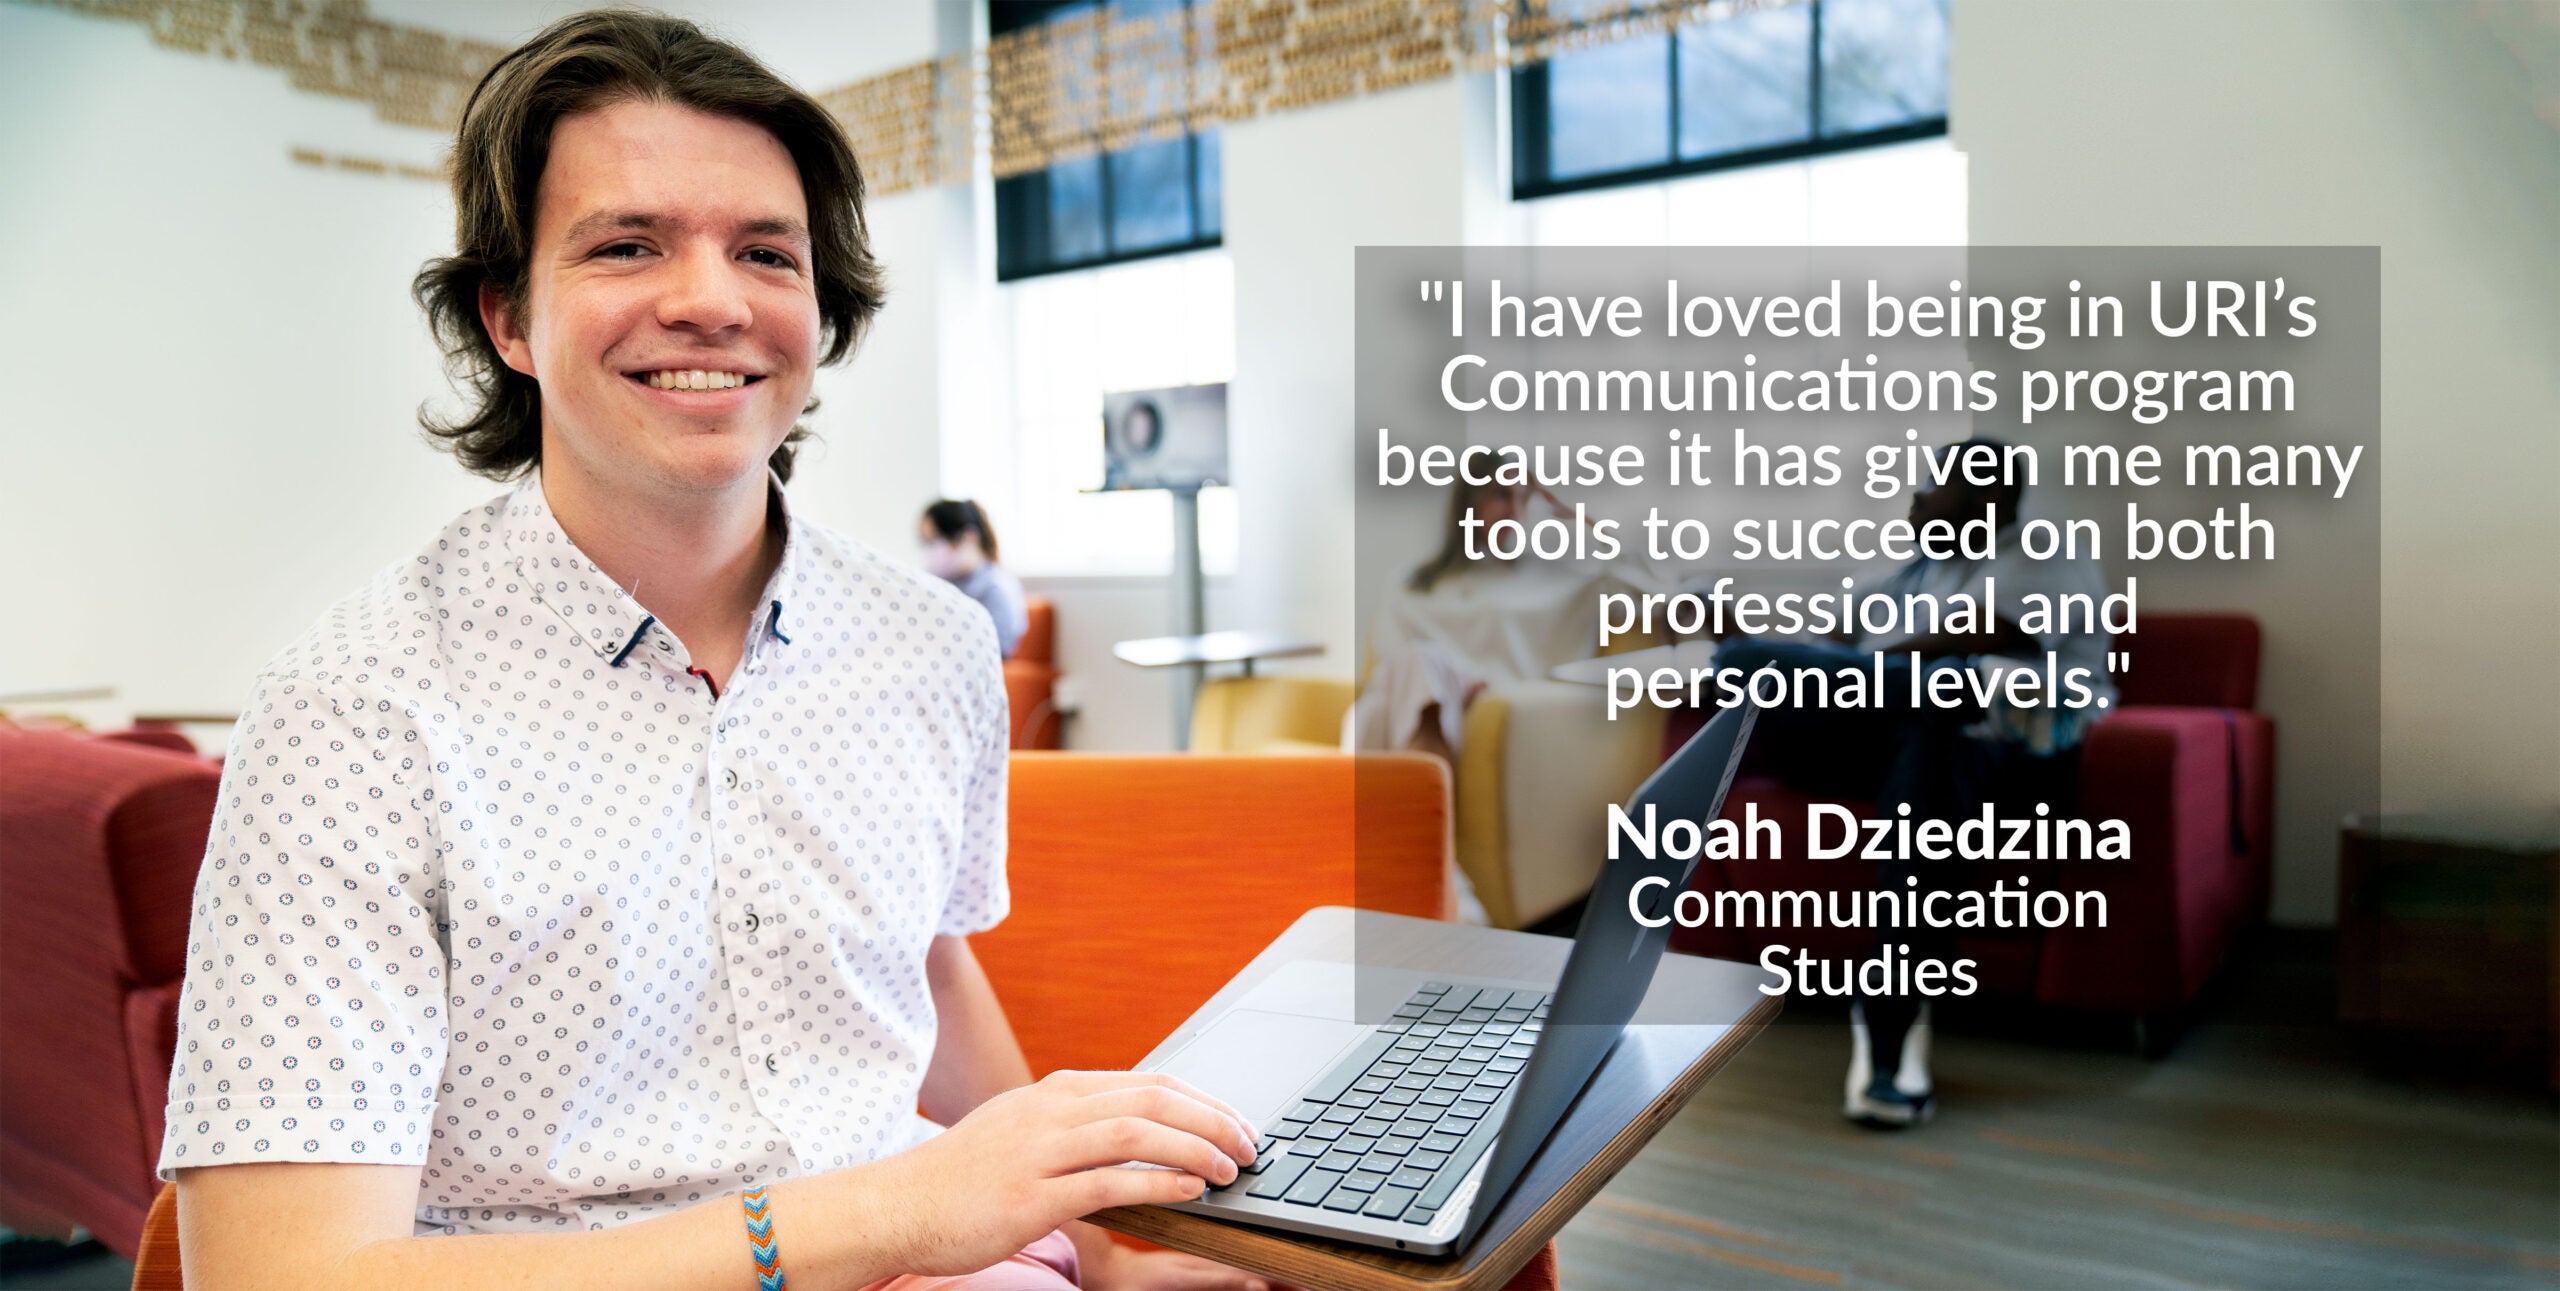 Photo of Noah Dziedzina of Communication Studies with the quote "I have loved being in URI’s Communications program because it has given me many tools to succeed on both professional and personal levels."